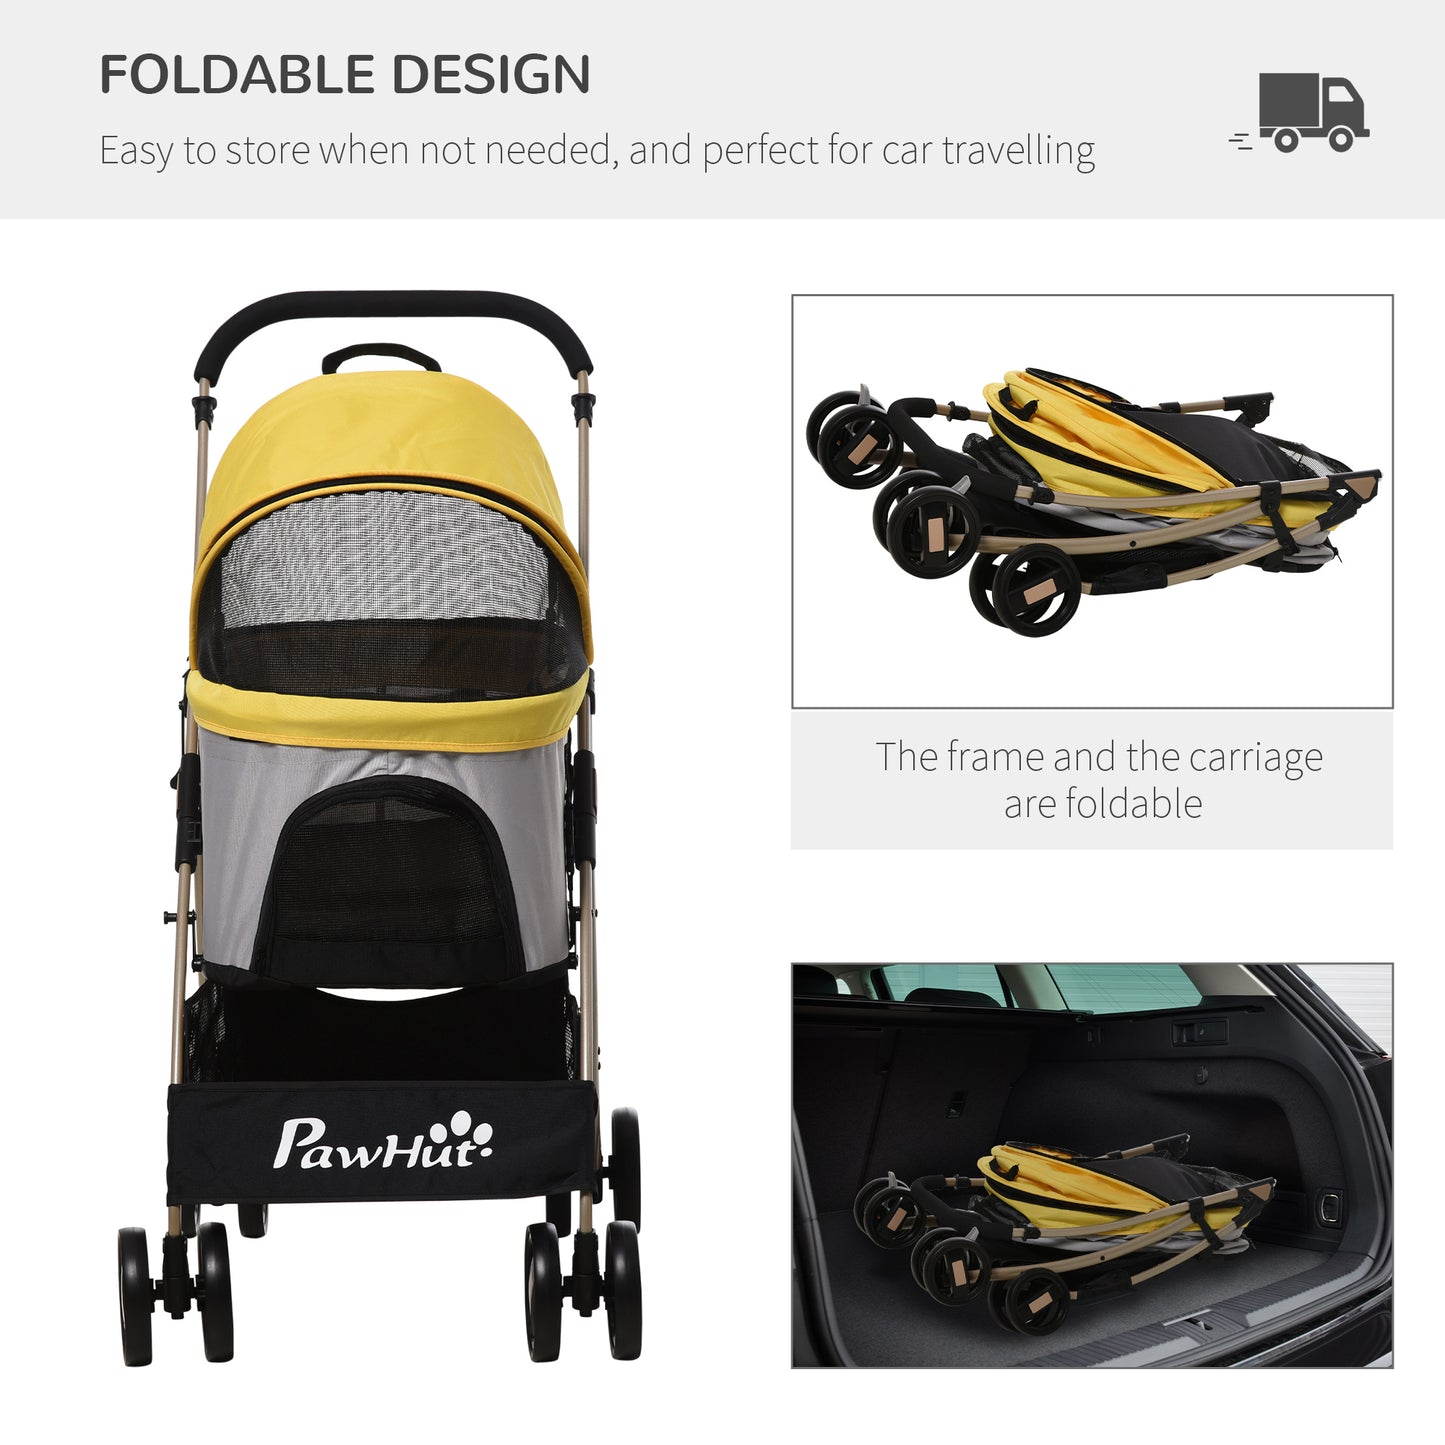 PawHut Detachable Pet Stroller, 3-In-1 Dog Cat Travel Carriage, Foldable Carrying Bag with Universal Wheel Brake Canopy Basket Storage Bag, Yellow